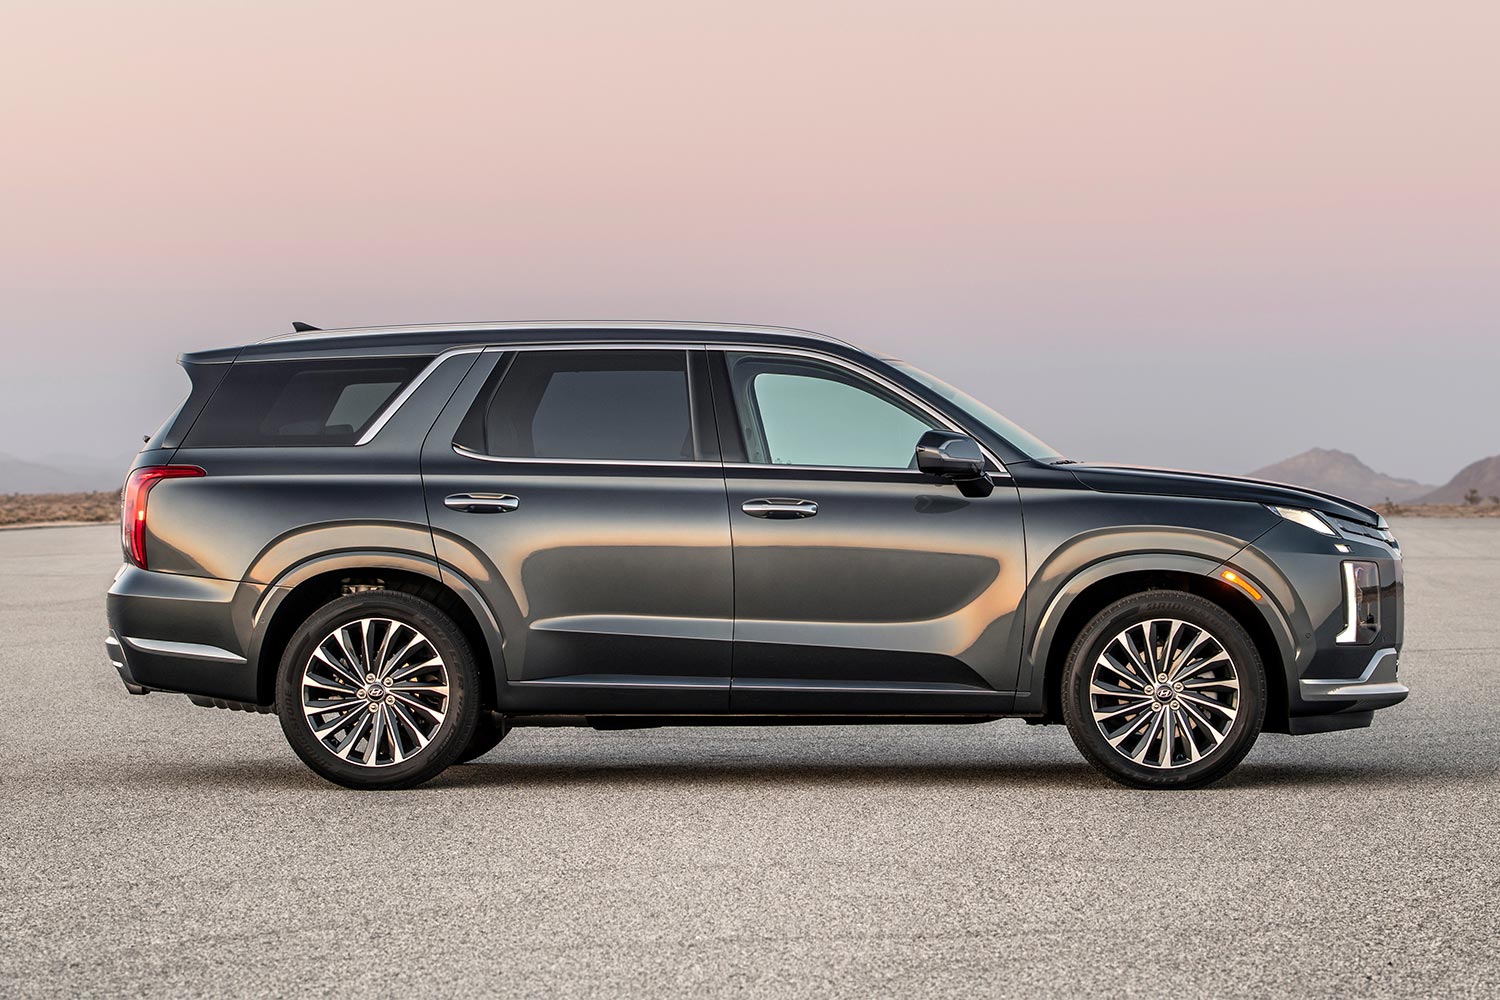 2023 Hyundai Palisade Review: The Definition of Affordable Luxury